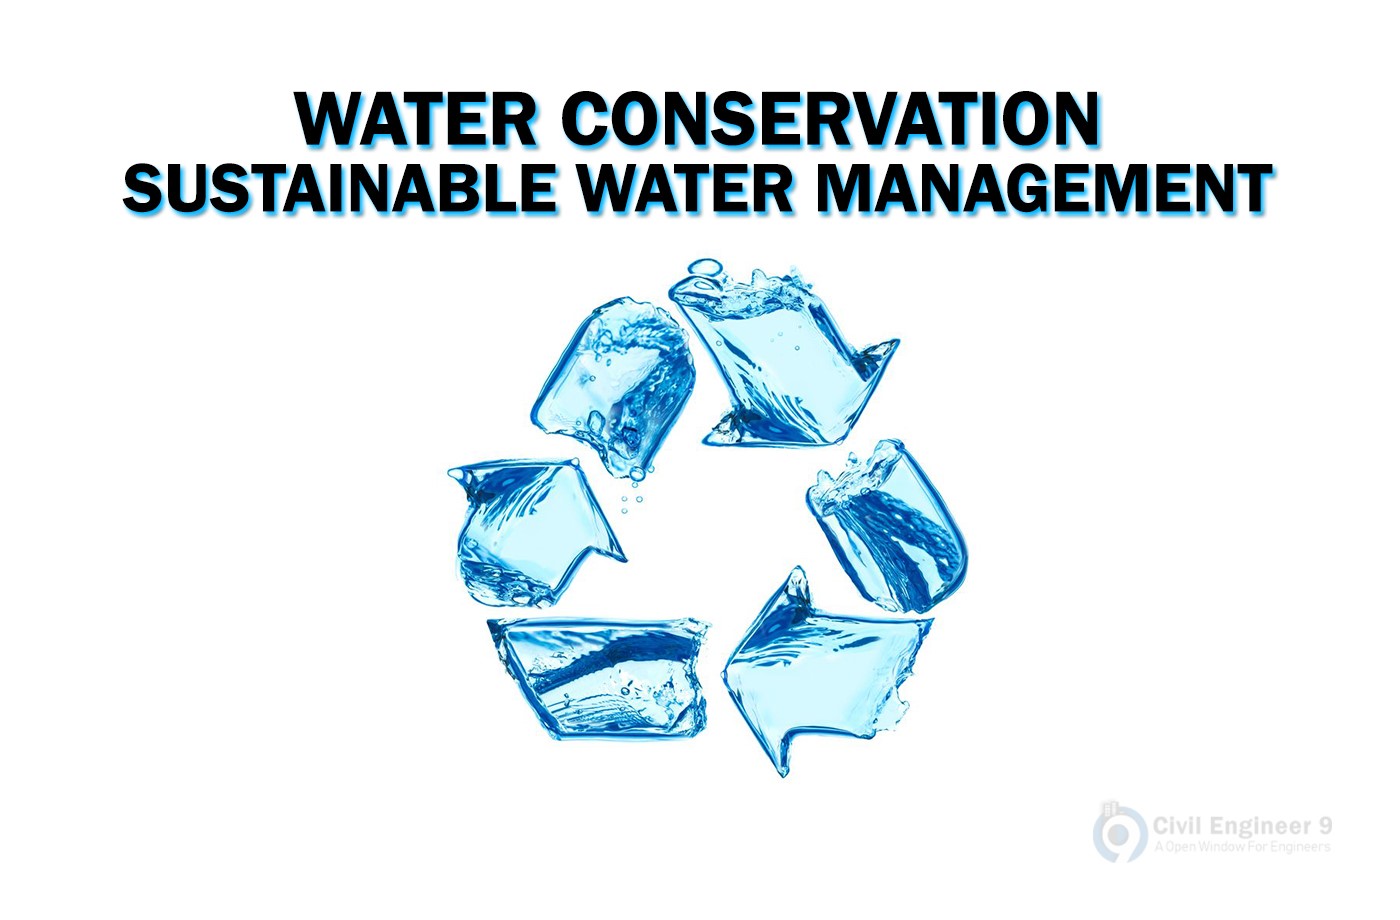 Water conservation